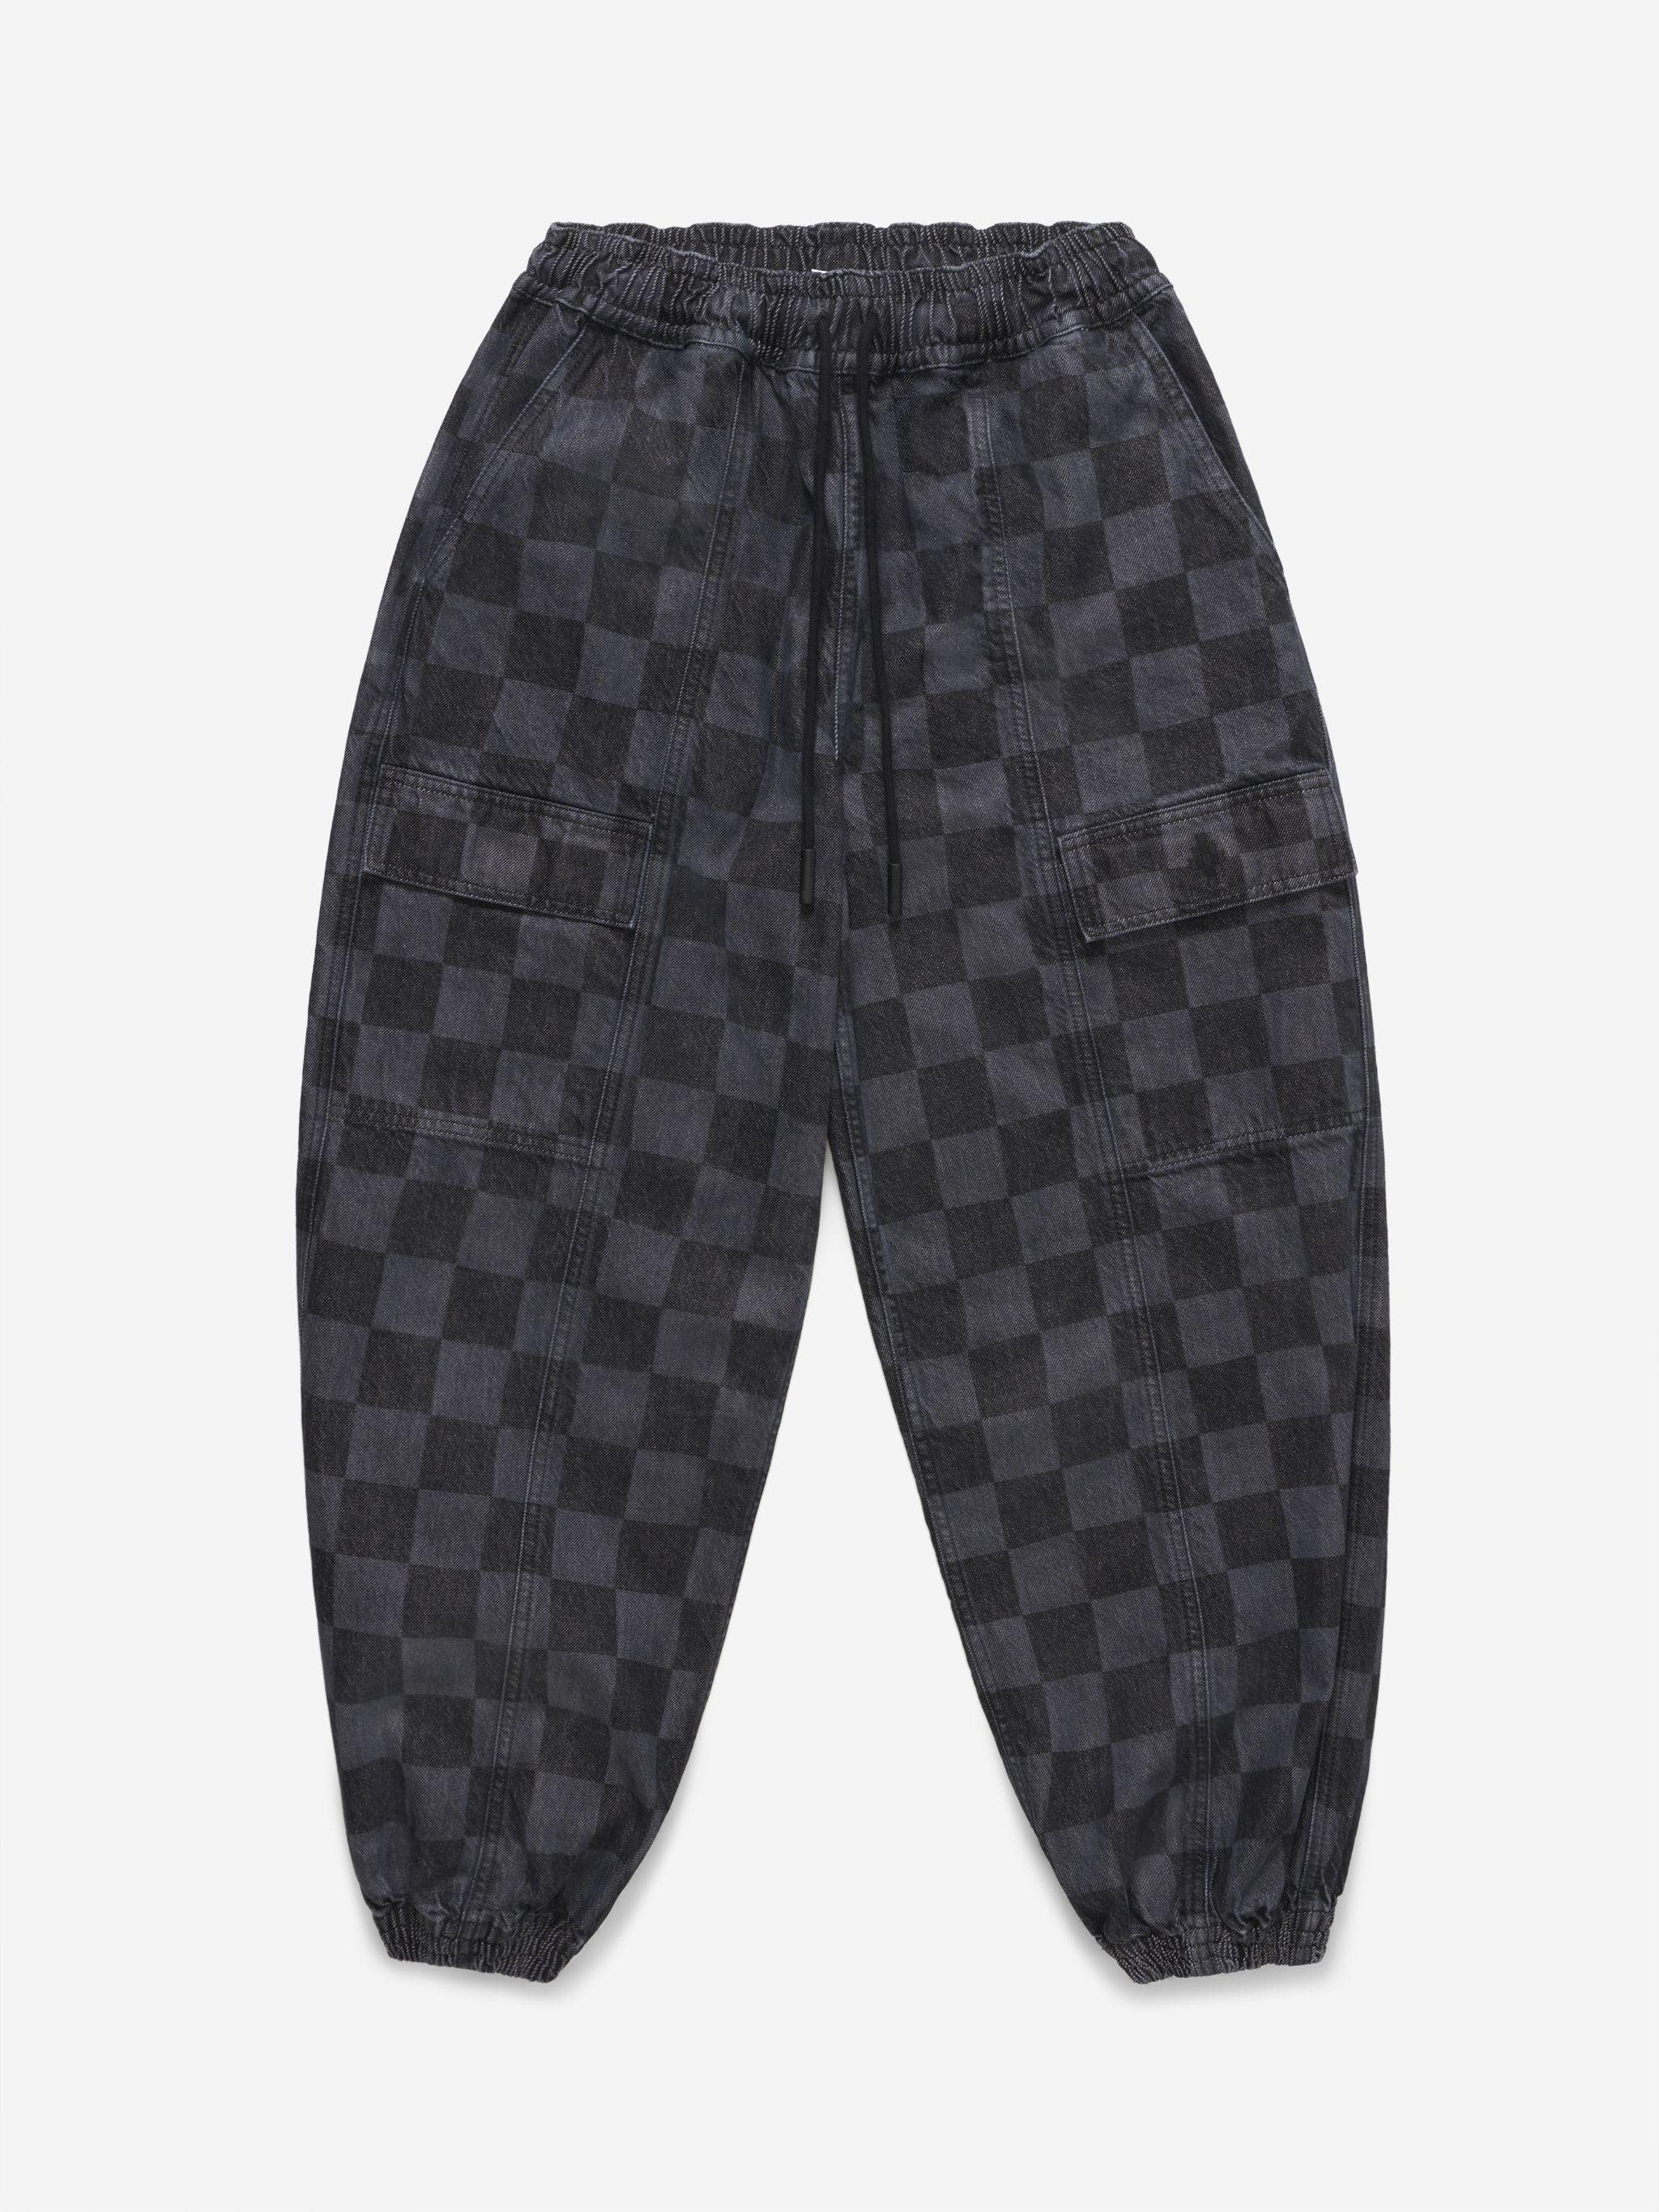 Black/grey cotton-denim checkerboard-print denim track pants from Marcelo Burlon County of Milan featuring checkerboard print, drawstring fastening waist, two side flap pockets, two side slit pockets, rear welt pocket and tapered leg.